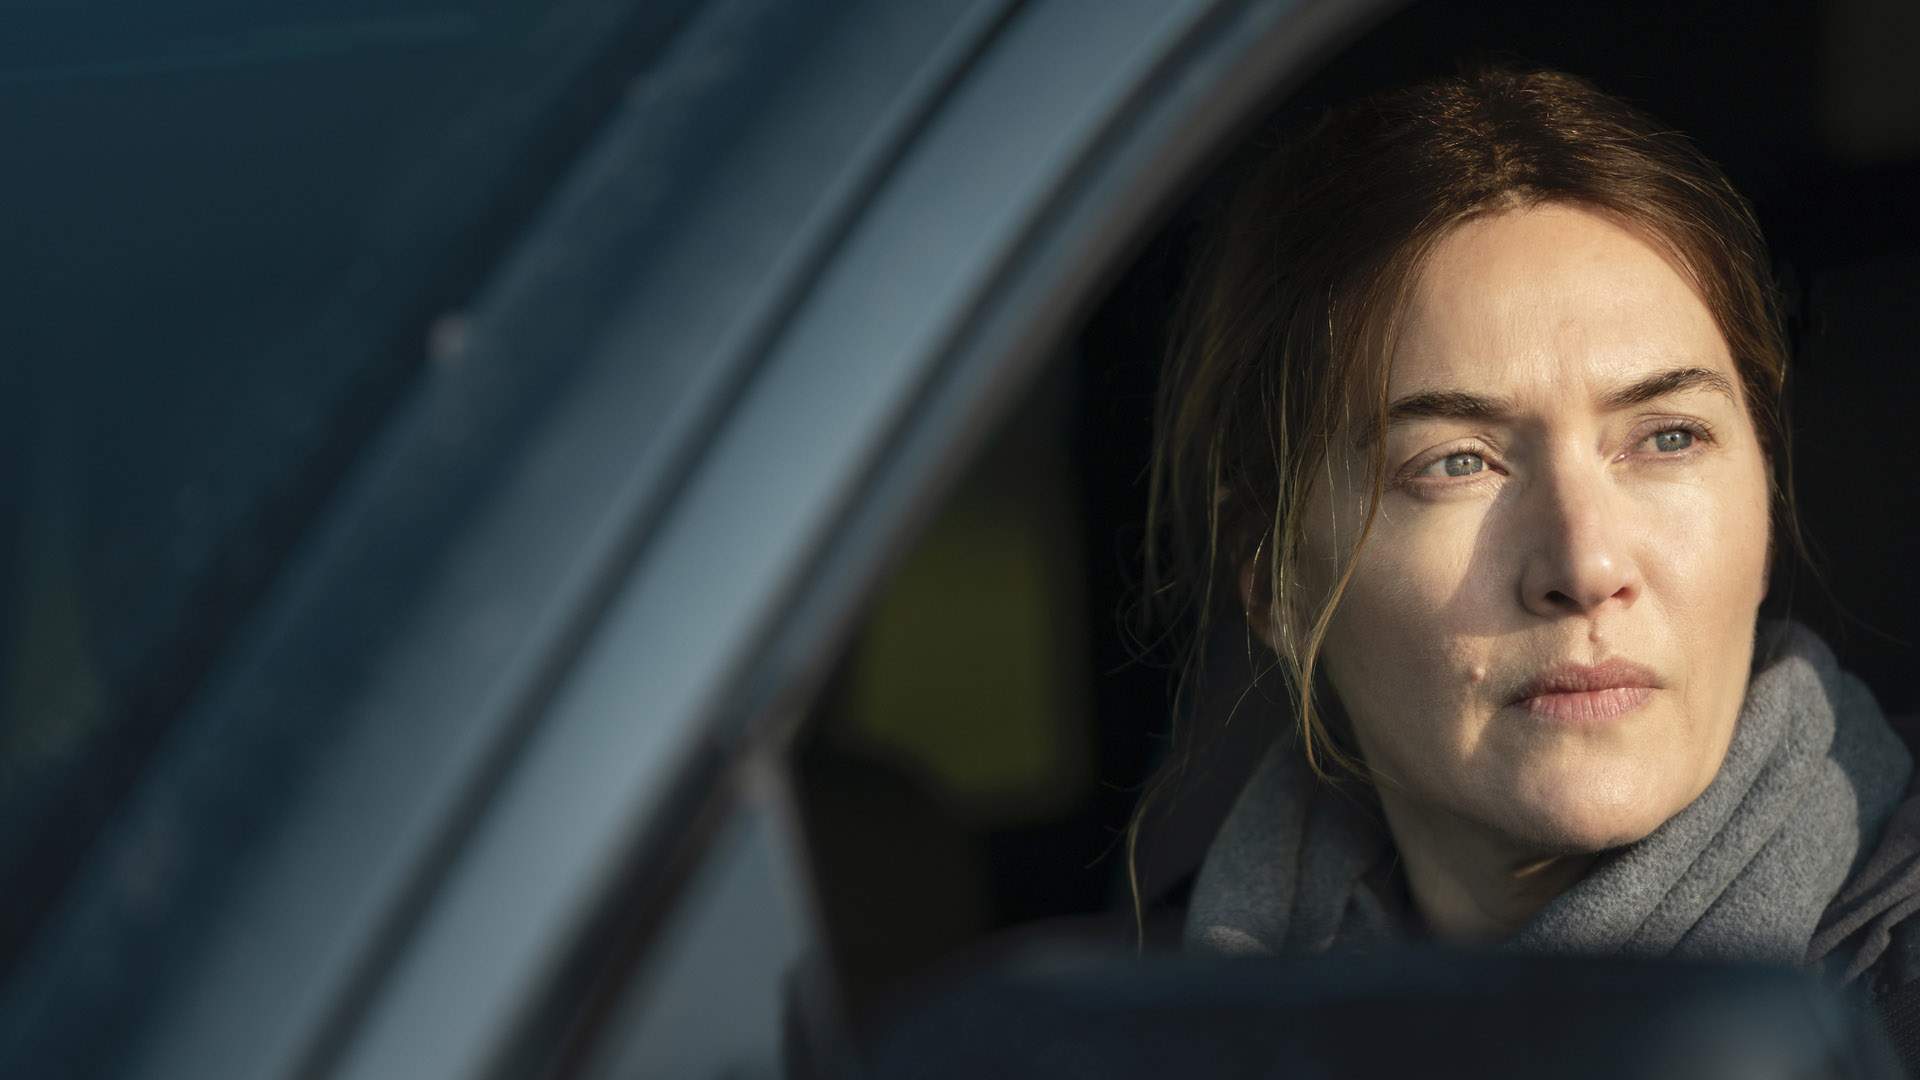 Kate Winslet Is a Small-Town Detective in the Trailer for New HBO Miniseries 'Mare of Easttown'